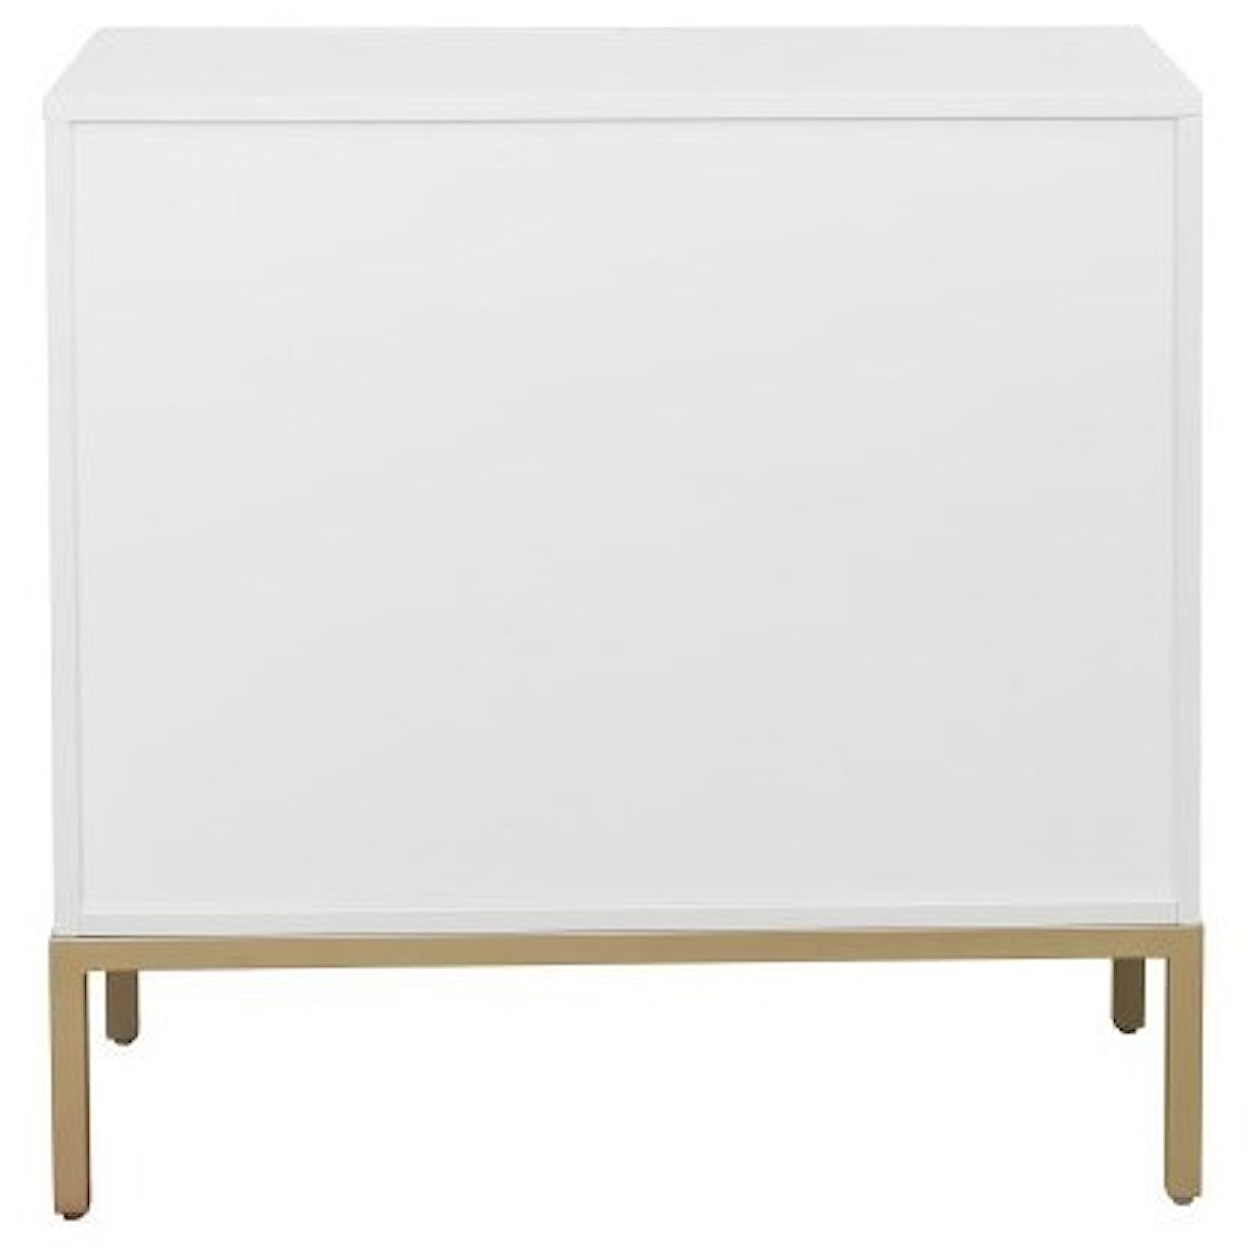 Accentrics Home Small Space Metal Base White Door Cabinet